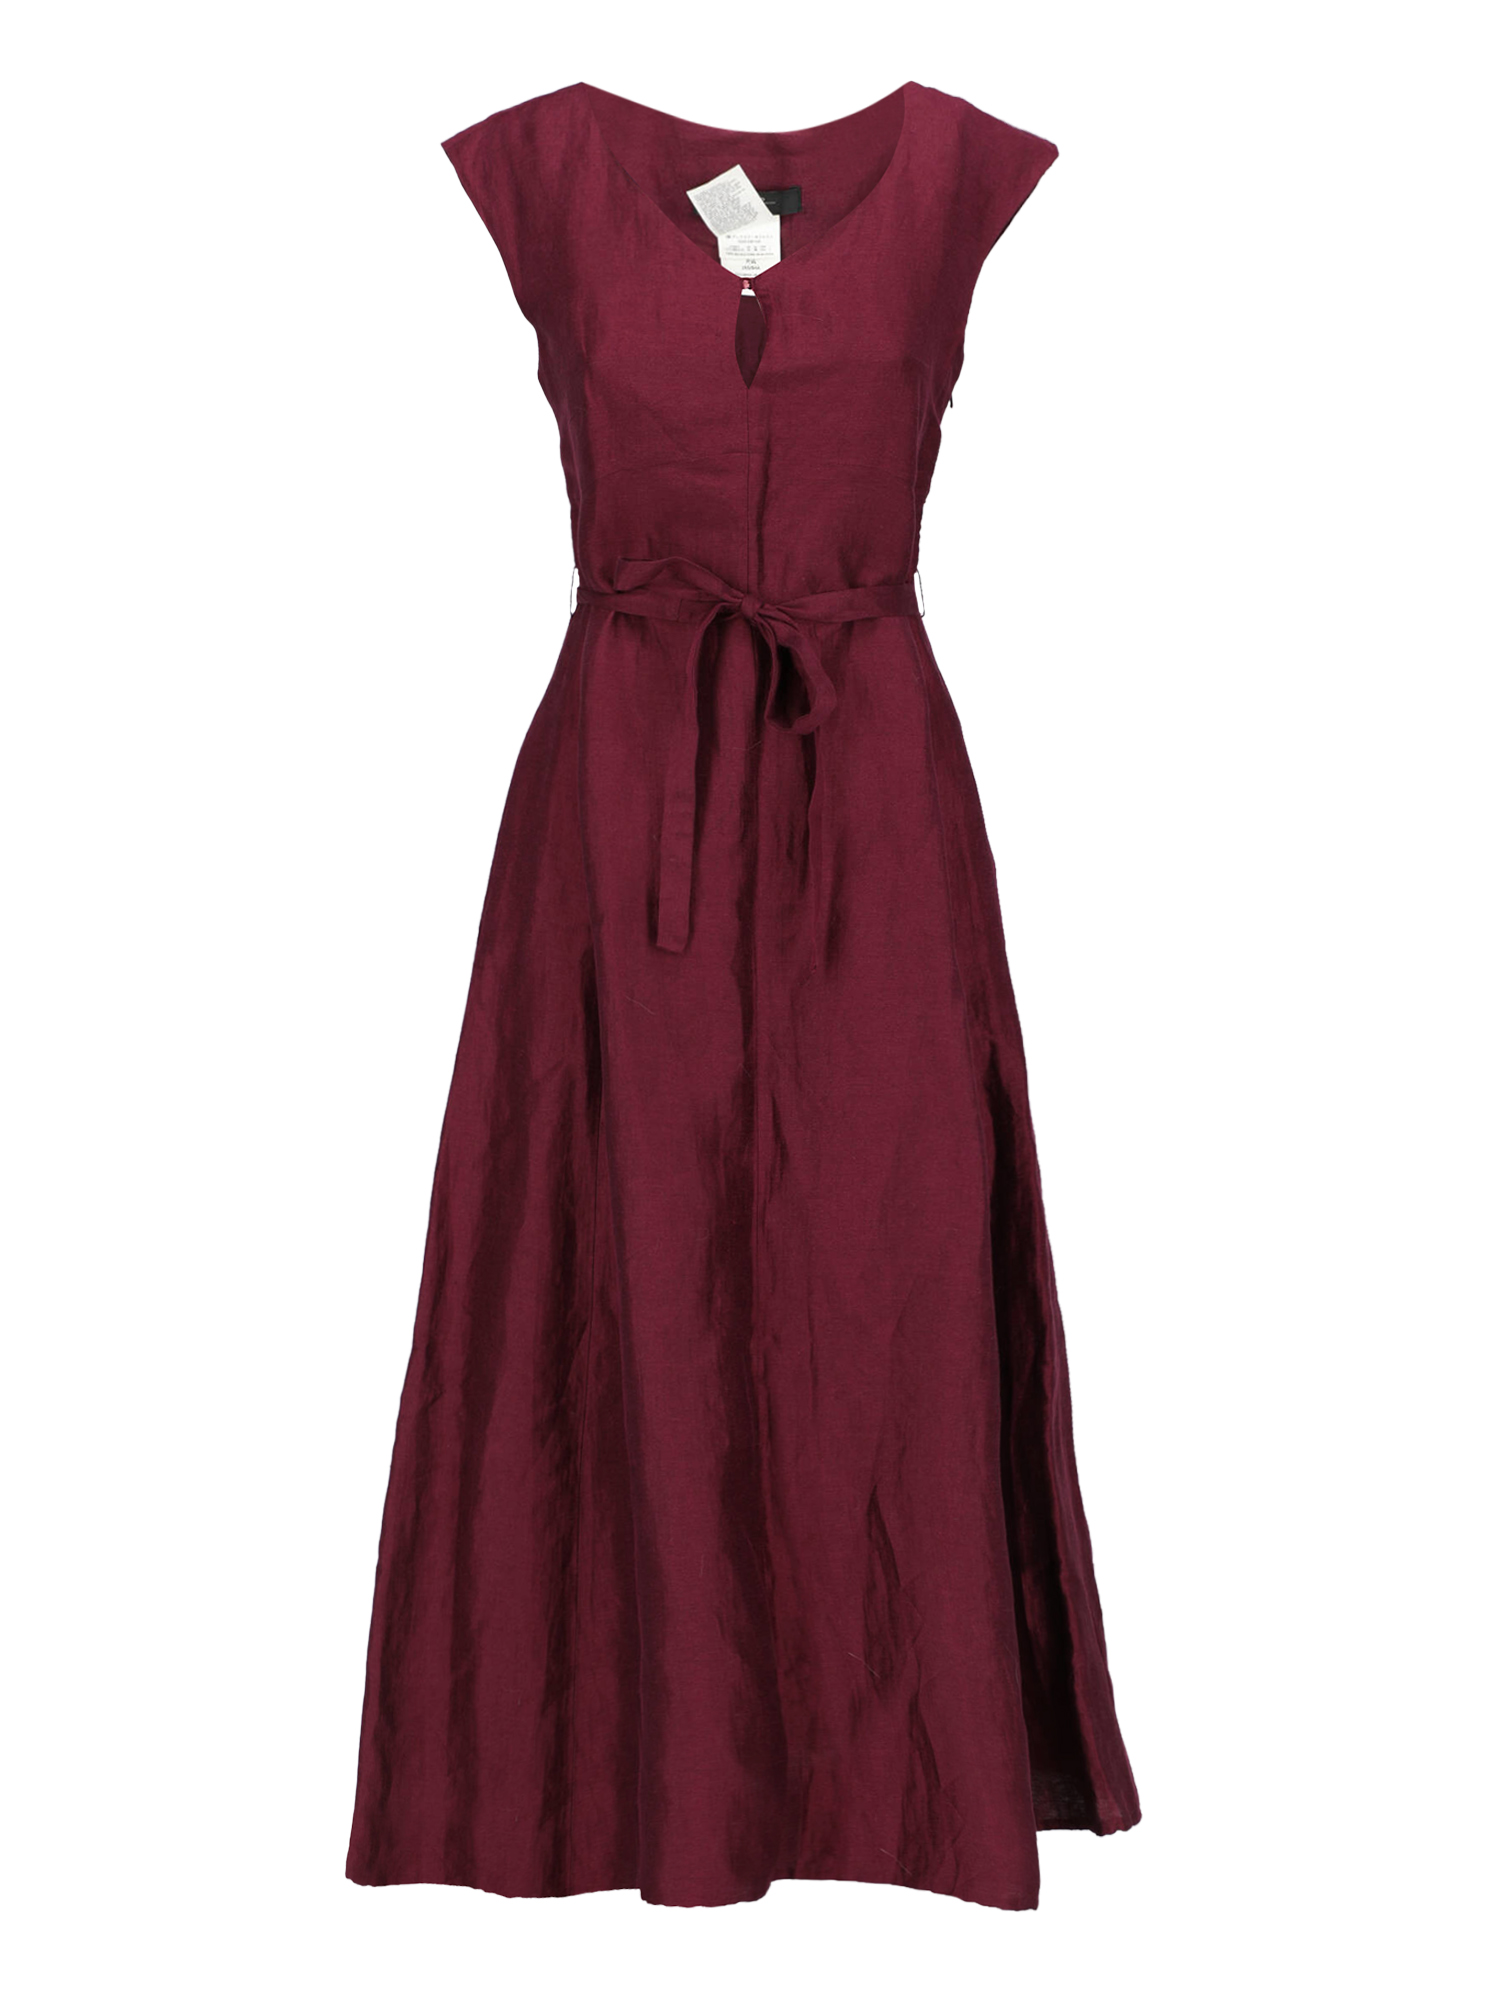 Condition: Very Good, Solid Color Eco-Friendly Fabric, Color: Burgundy - XS - IT 38 -